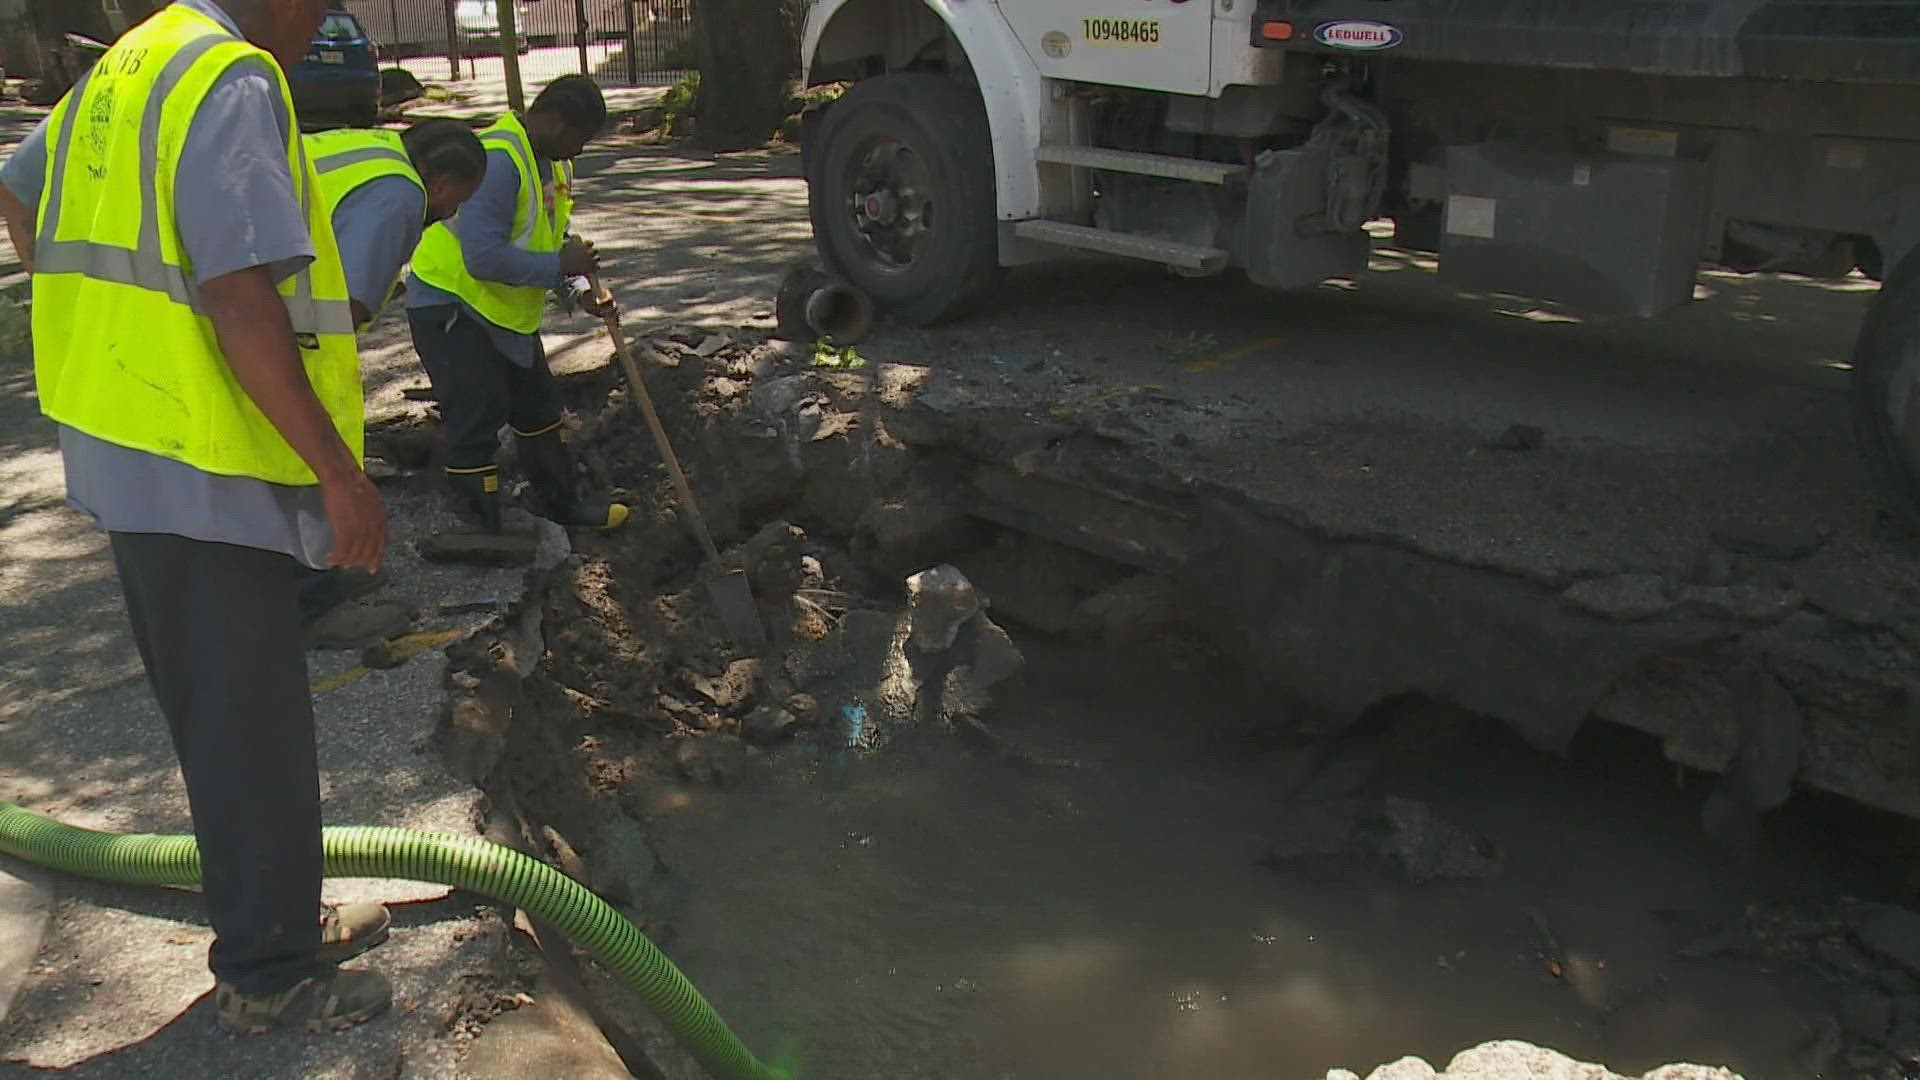 Since Katrina, the City has been working to try and fix roads and pipes thanks to $2 billion in funding from FEMA. Only about half of that money has been used.